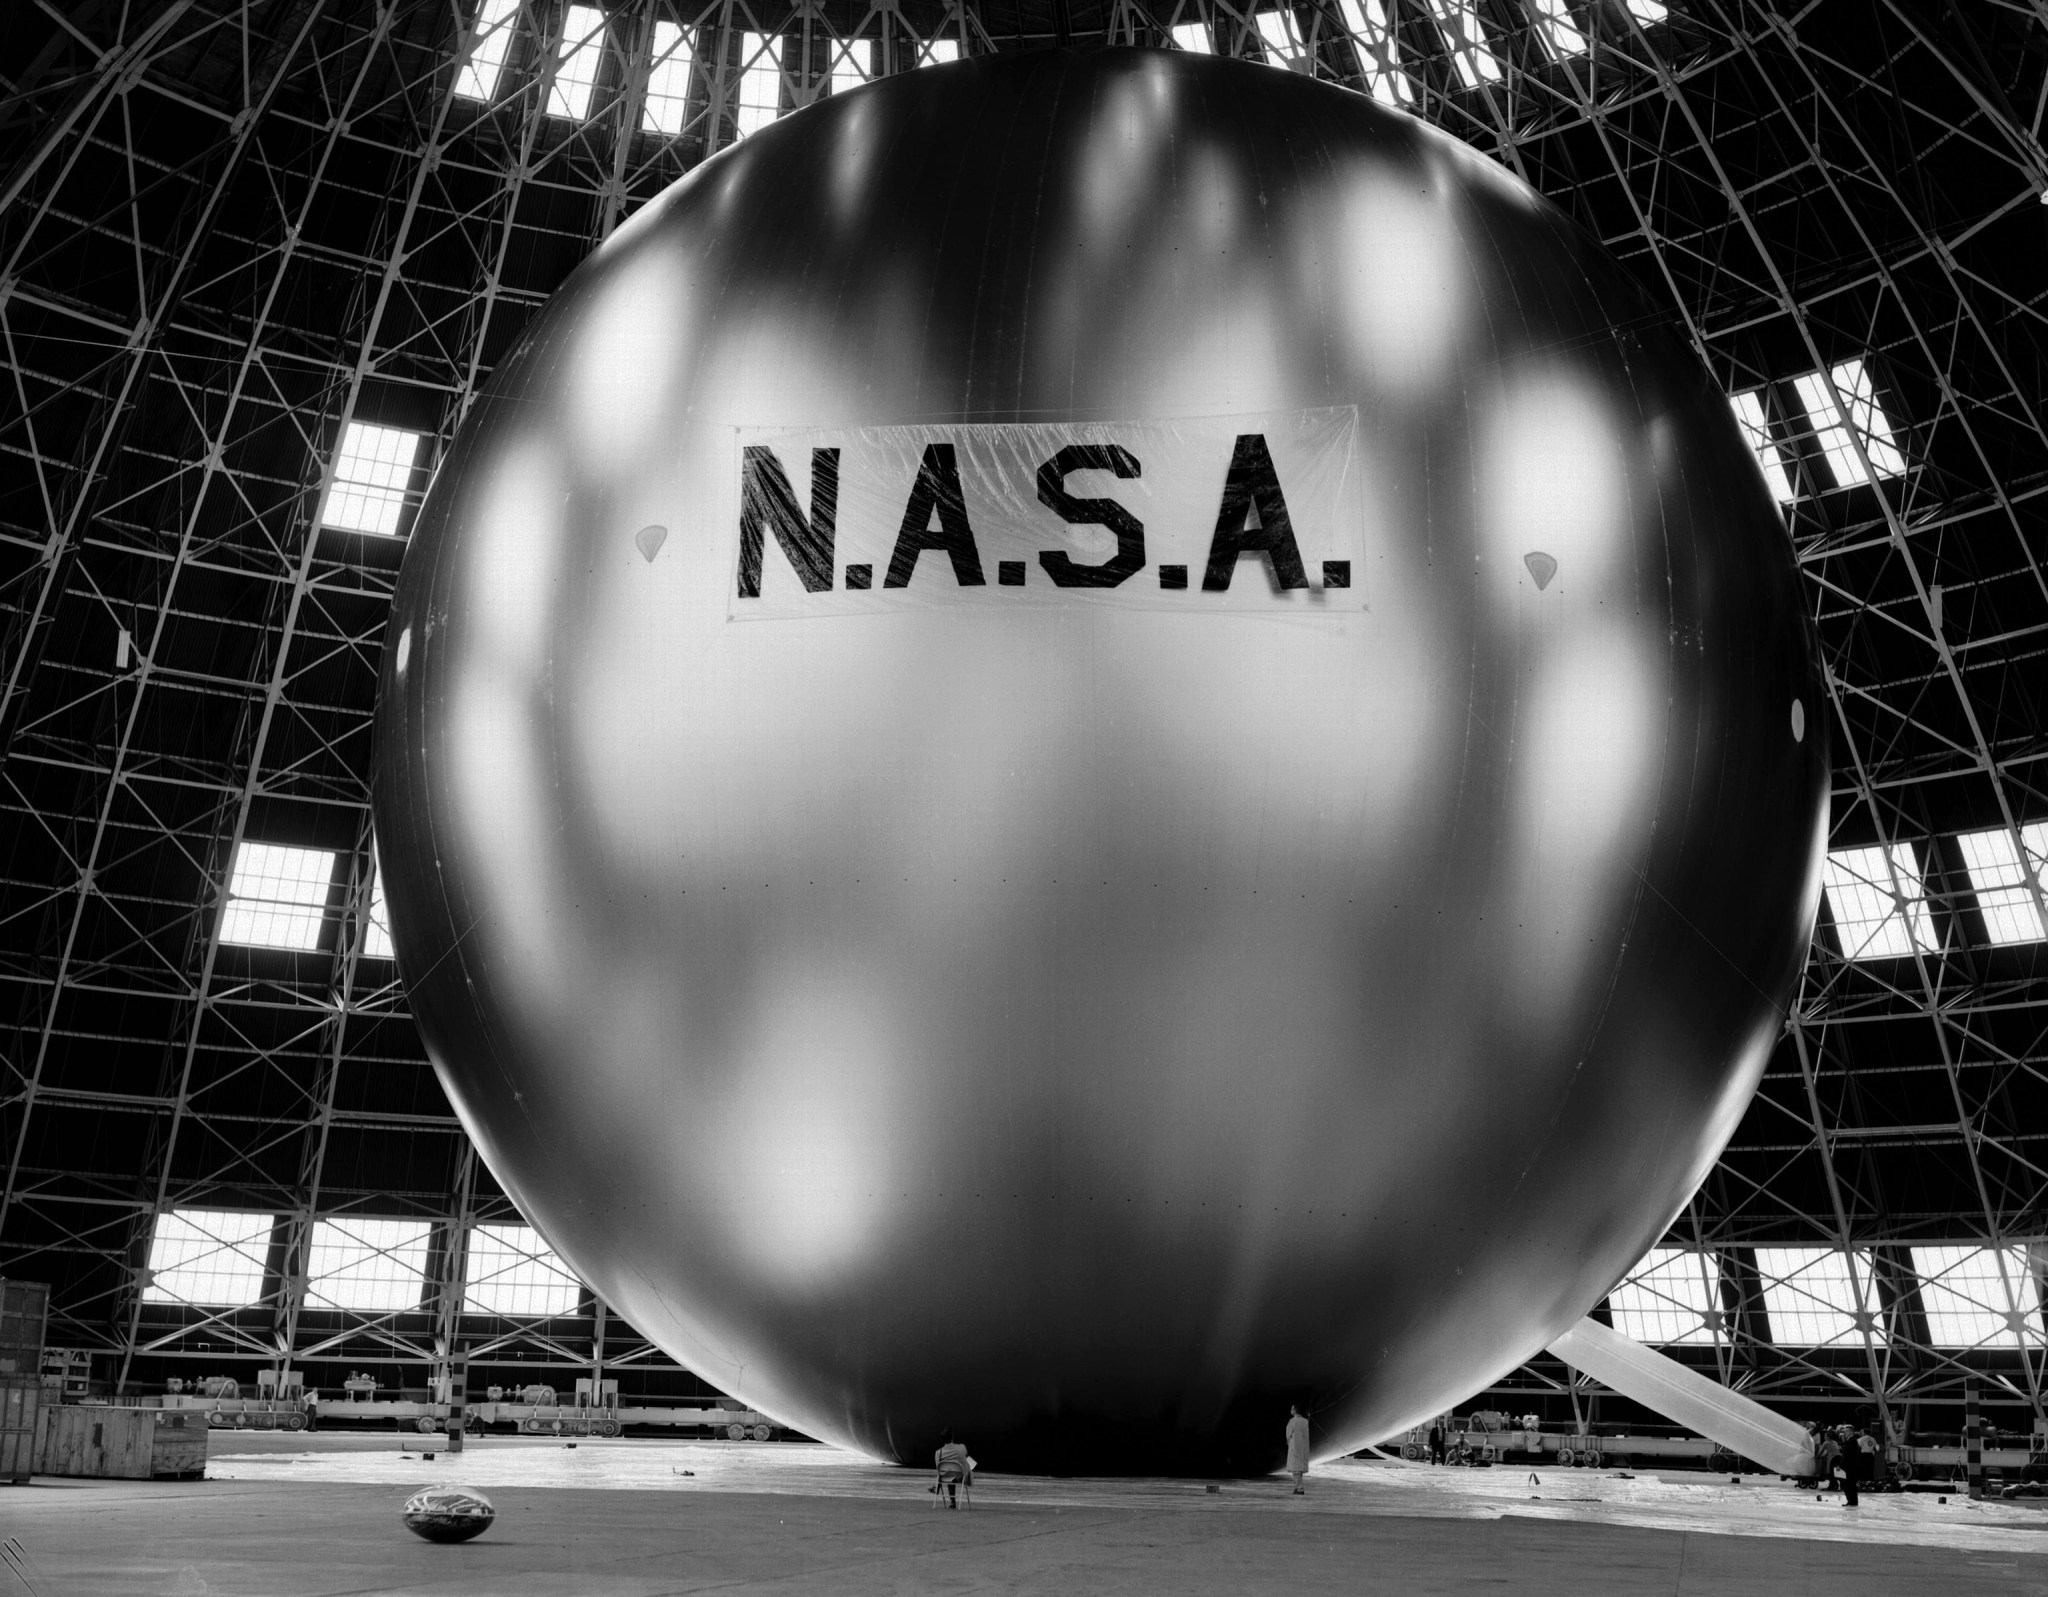 A black-and-white photo shows a very large, silver, spherical communication satellite with N.A.S.A in black letters across the center. The satellite is inside of a large hanger with several windows. Two people can be seen in front of the satellite, appearing very small in comparison.